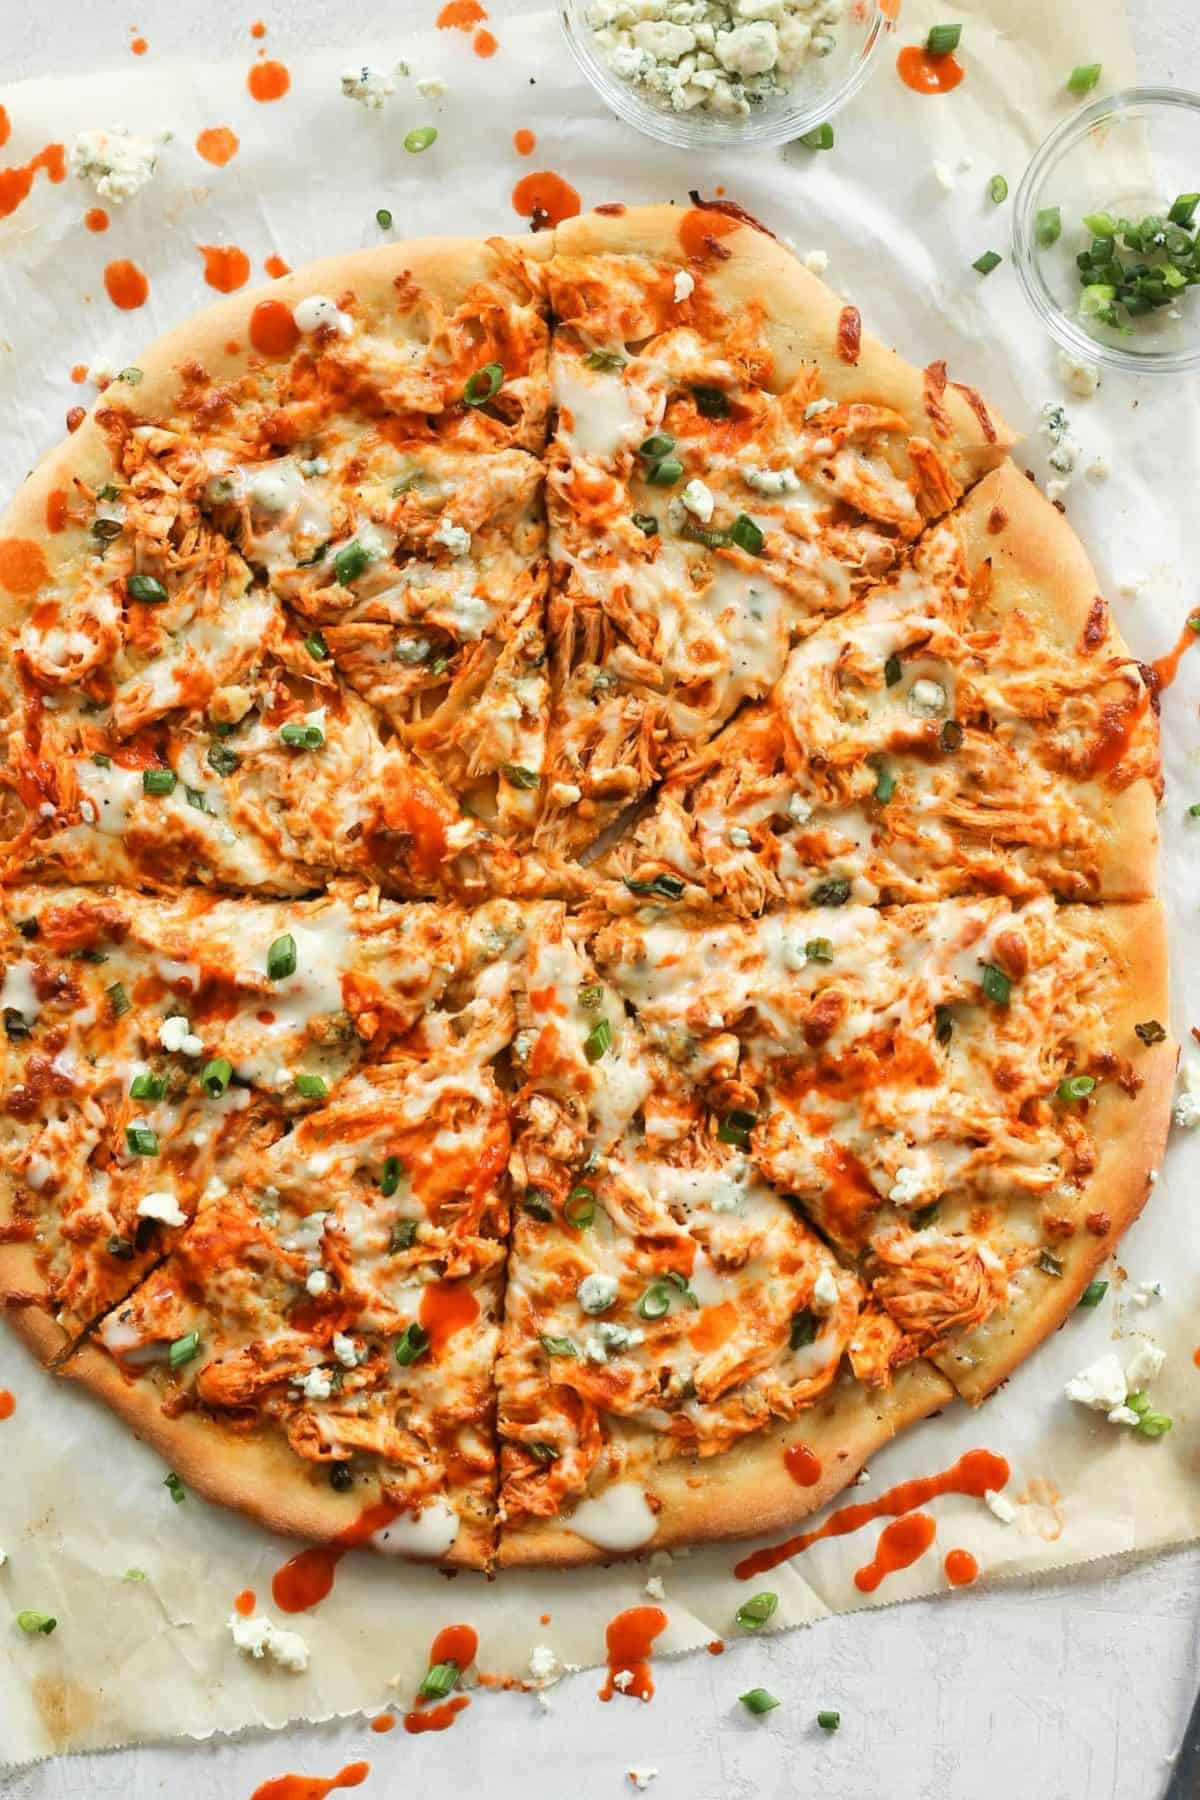 Calories In Buffalo Chicken Pizza Awesome Best Calories In Buffalo Chicken Pizza Celiac